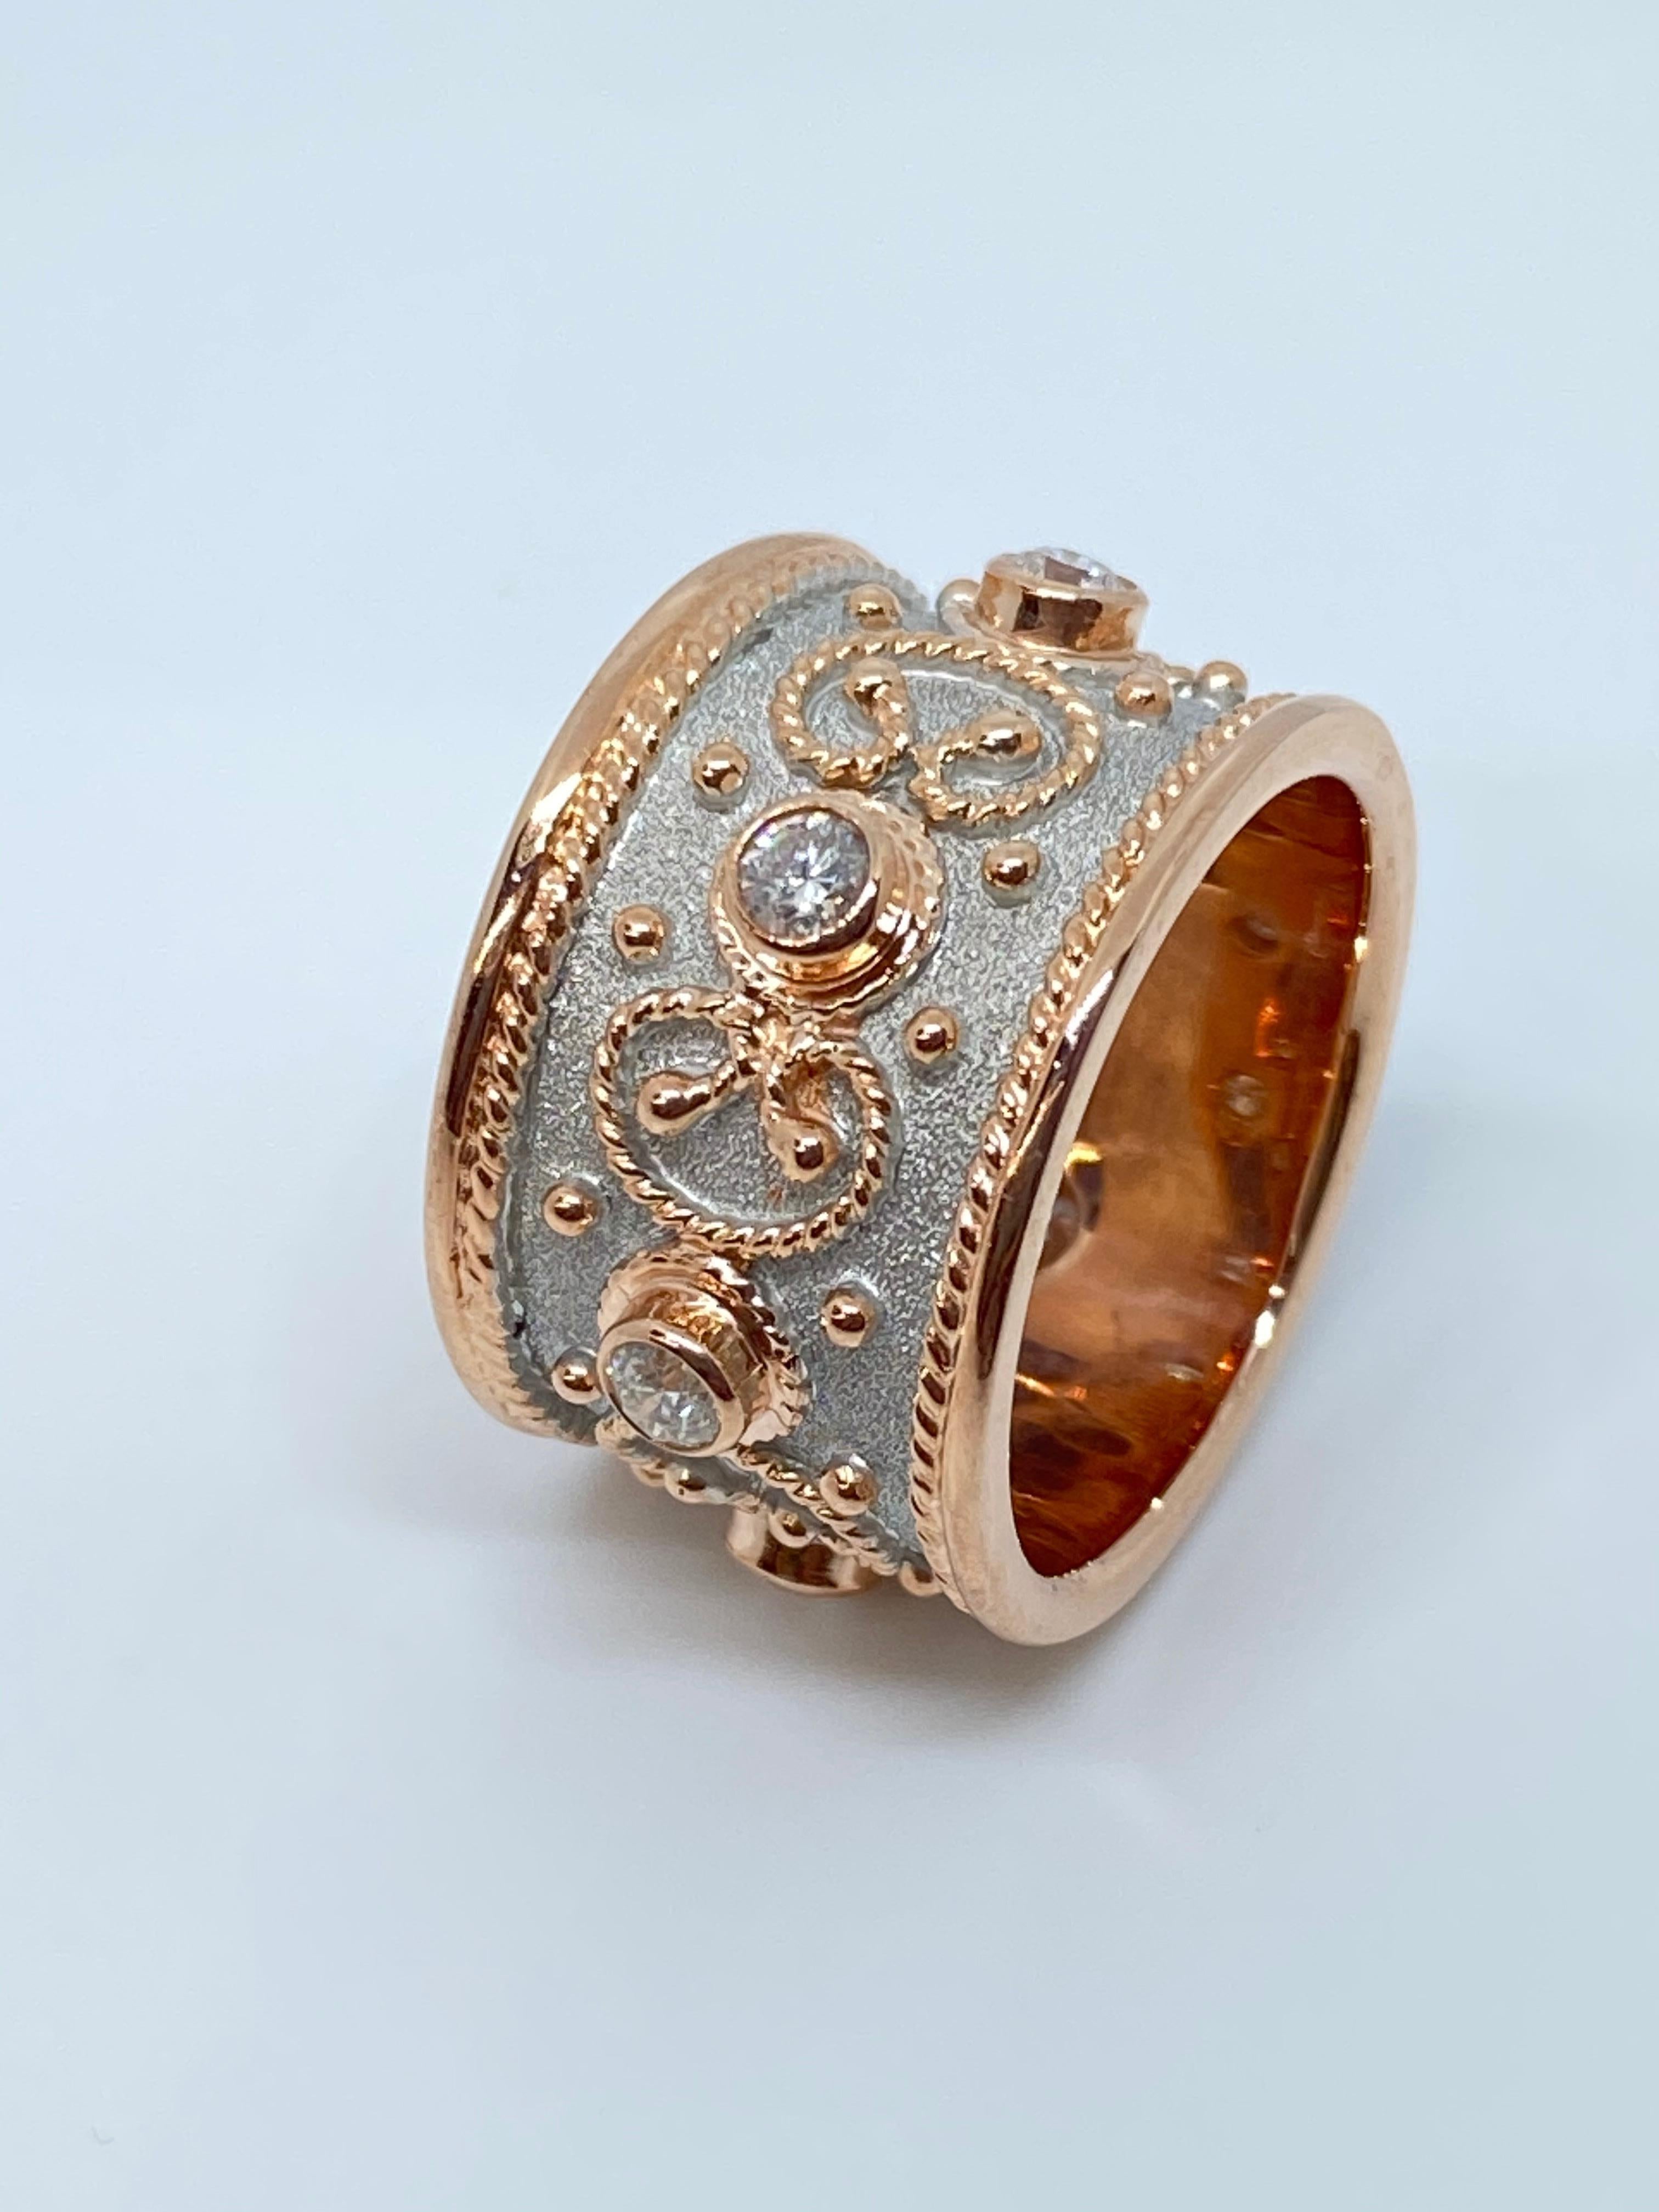 S.Georgios designer Diamond Two-Tone Band Ring is handmade from solid 18 Karat Rose Gold. The beautiful Rose Gold Band ring is microscopically decorated all the way around with Rose Gold bead granulation the shape of the Greek letter- Omega which